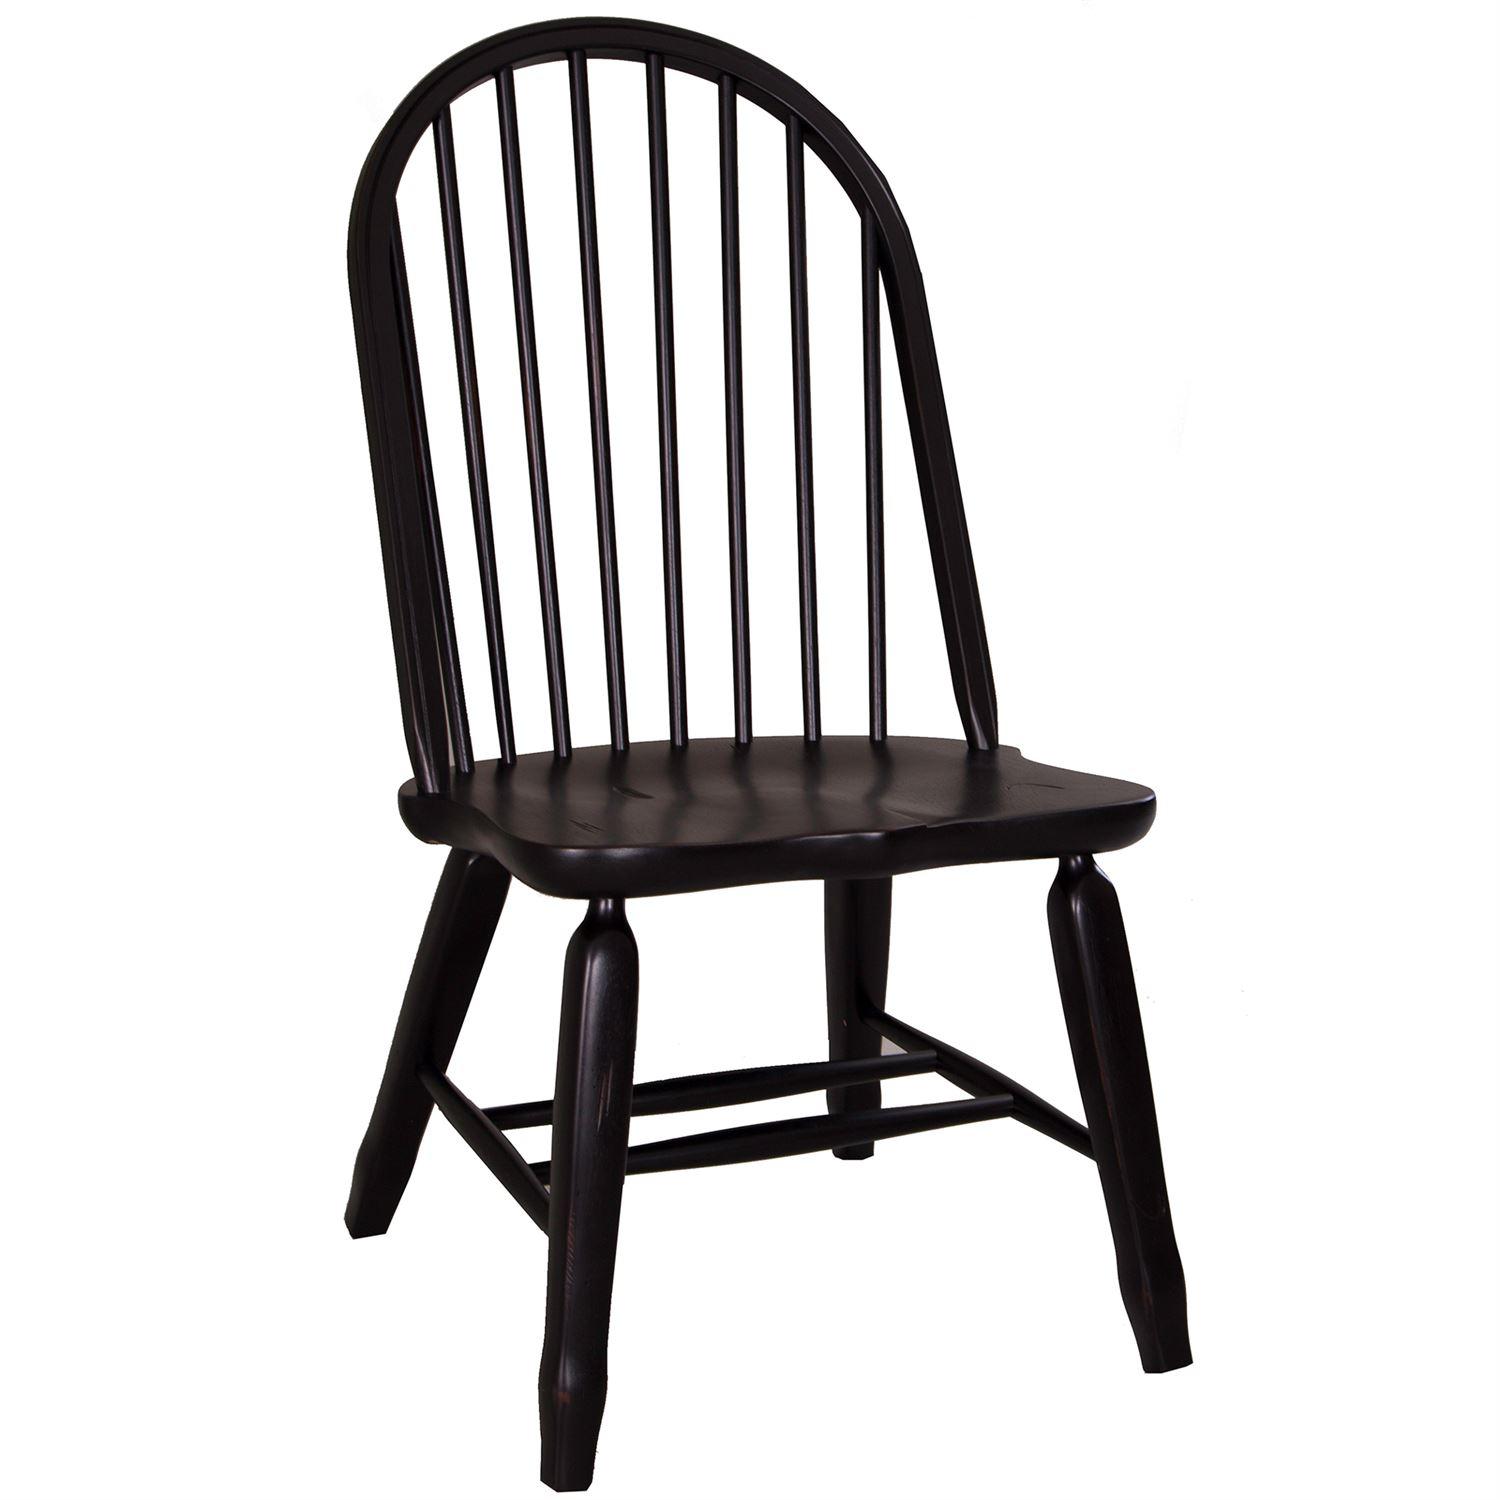   Treasures  (17-DR) Dining Side Chair  